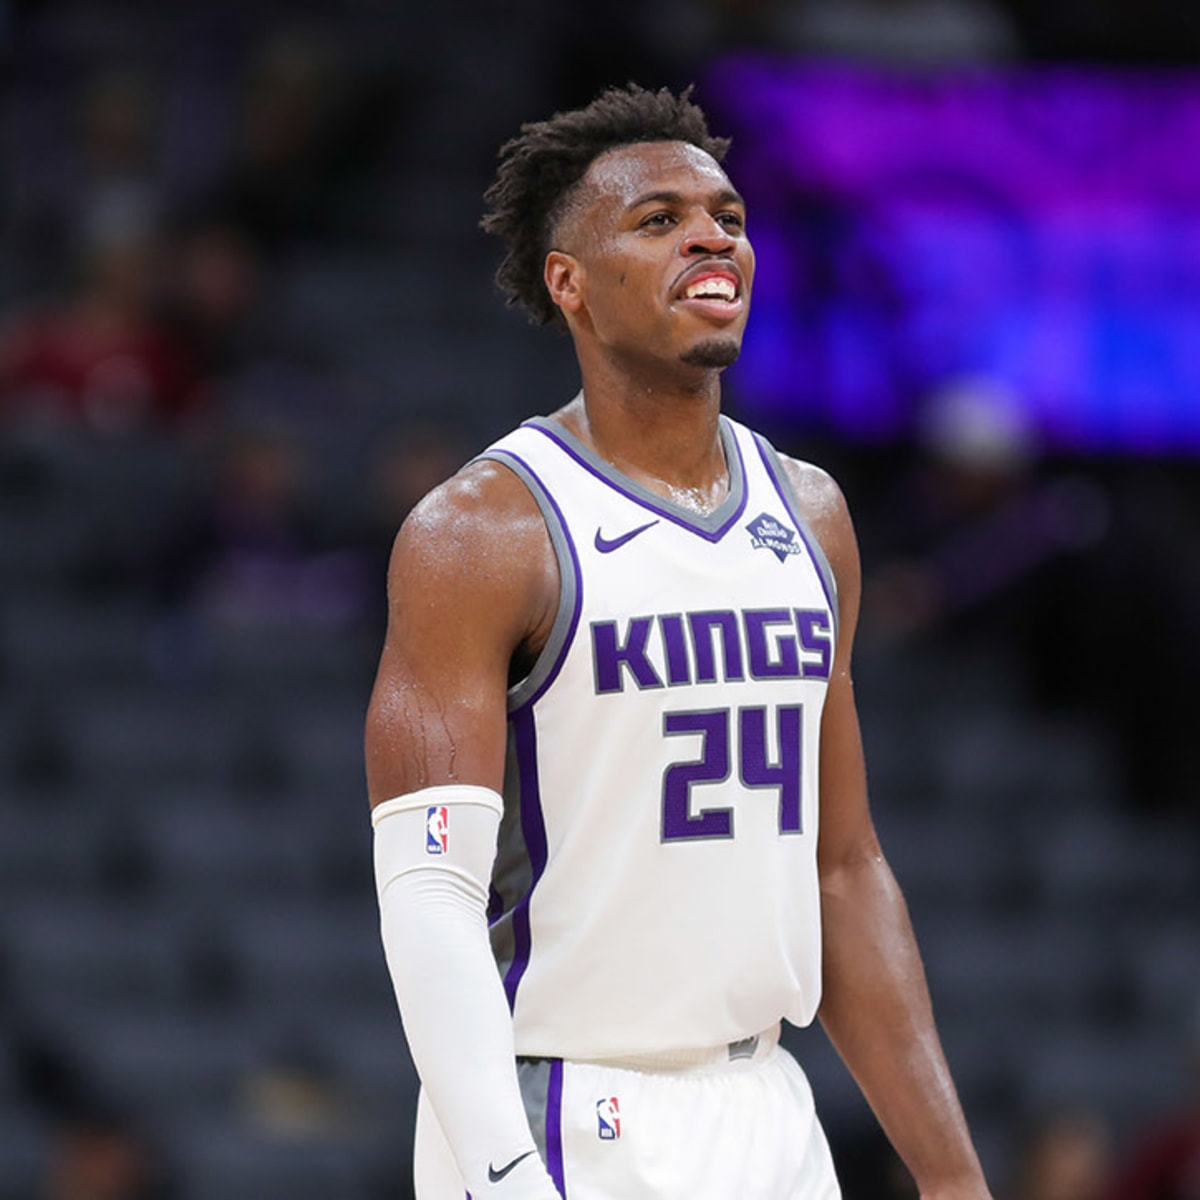 Buddy Hield 21 Points & 10 Rebounds  Indiana Pacers vs. Sacramento Kings 